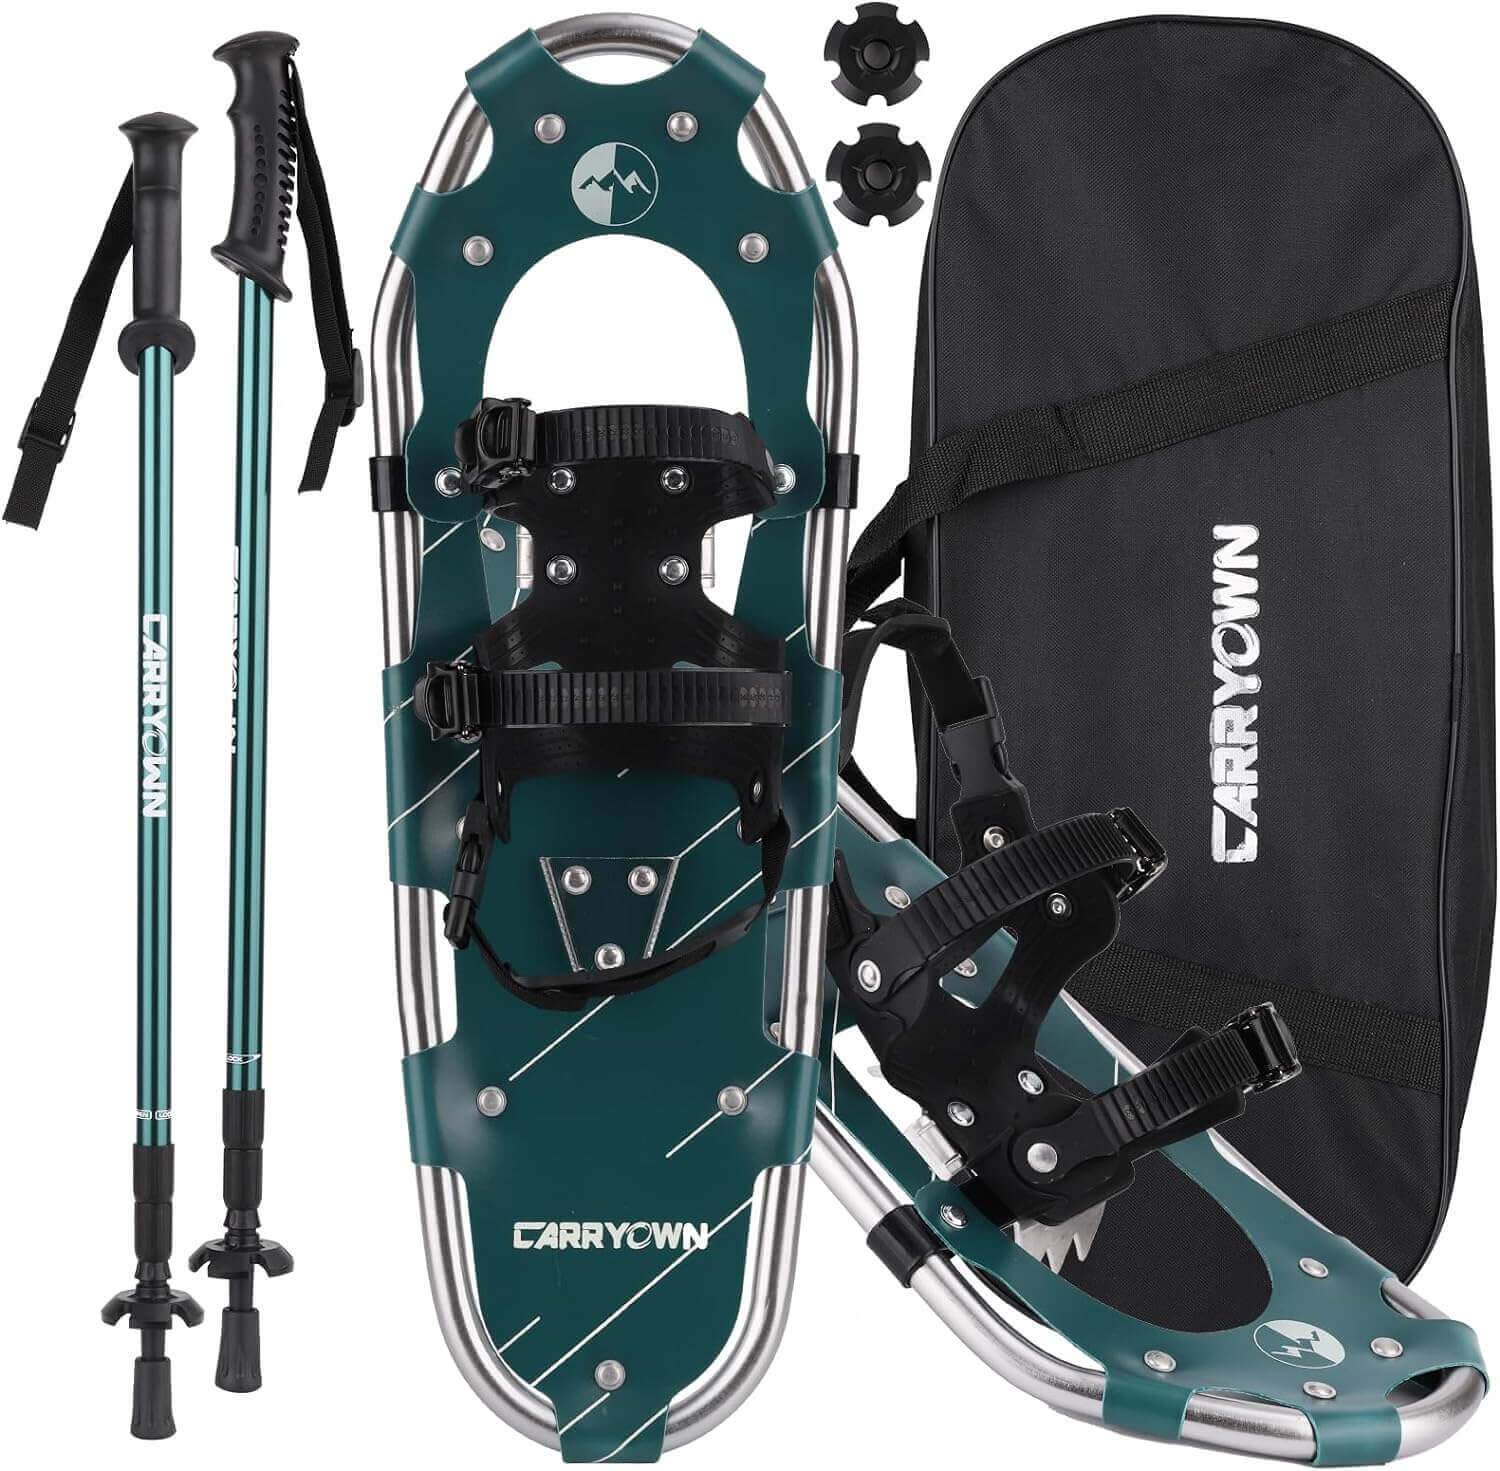 Shop The Latest >3 in 1 Light Weight Snowshoes Set with Trekking Poles > *Only $121.49*> From The Top Brand > *‎Carryownl* > Shop Now and Get Free Shipping On Orders Over $45.00 >*Shop Earth Foot*